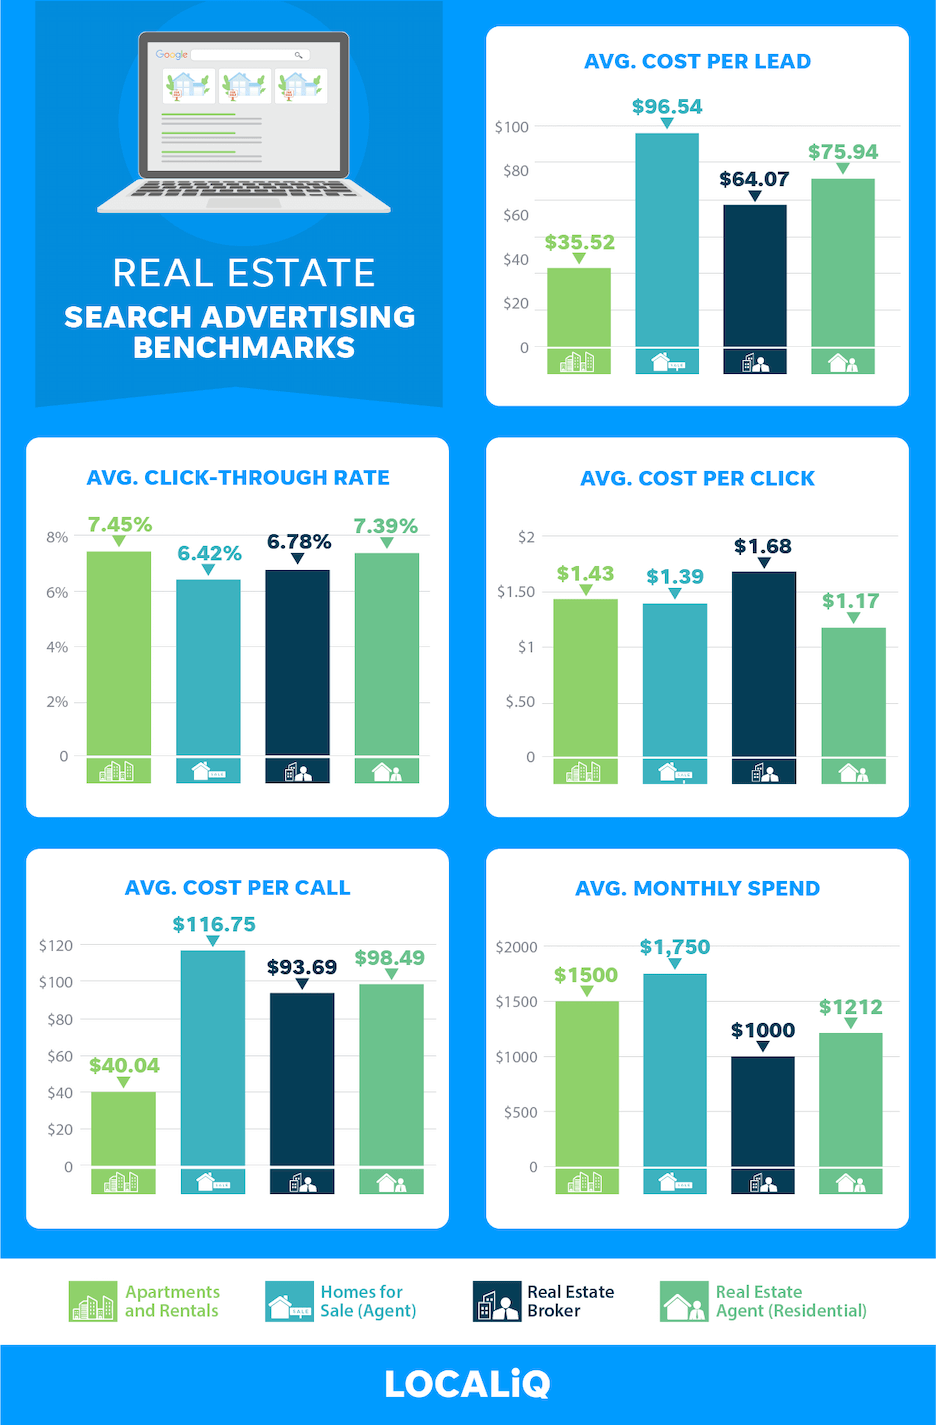 Real estate advertising benchmarks for search advertising